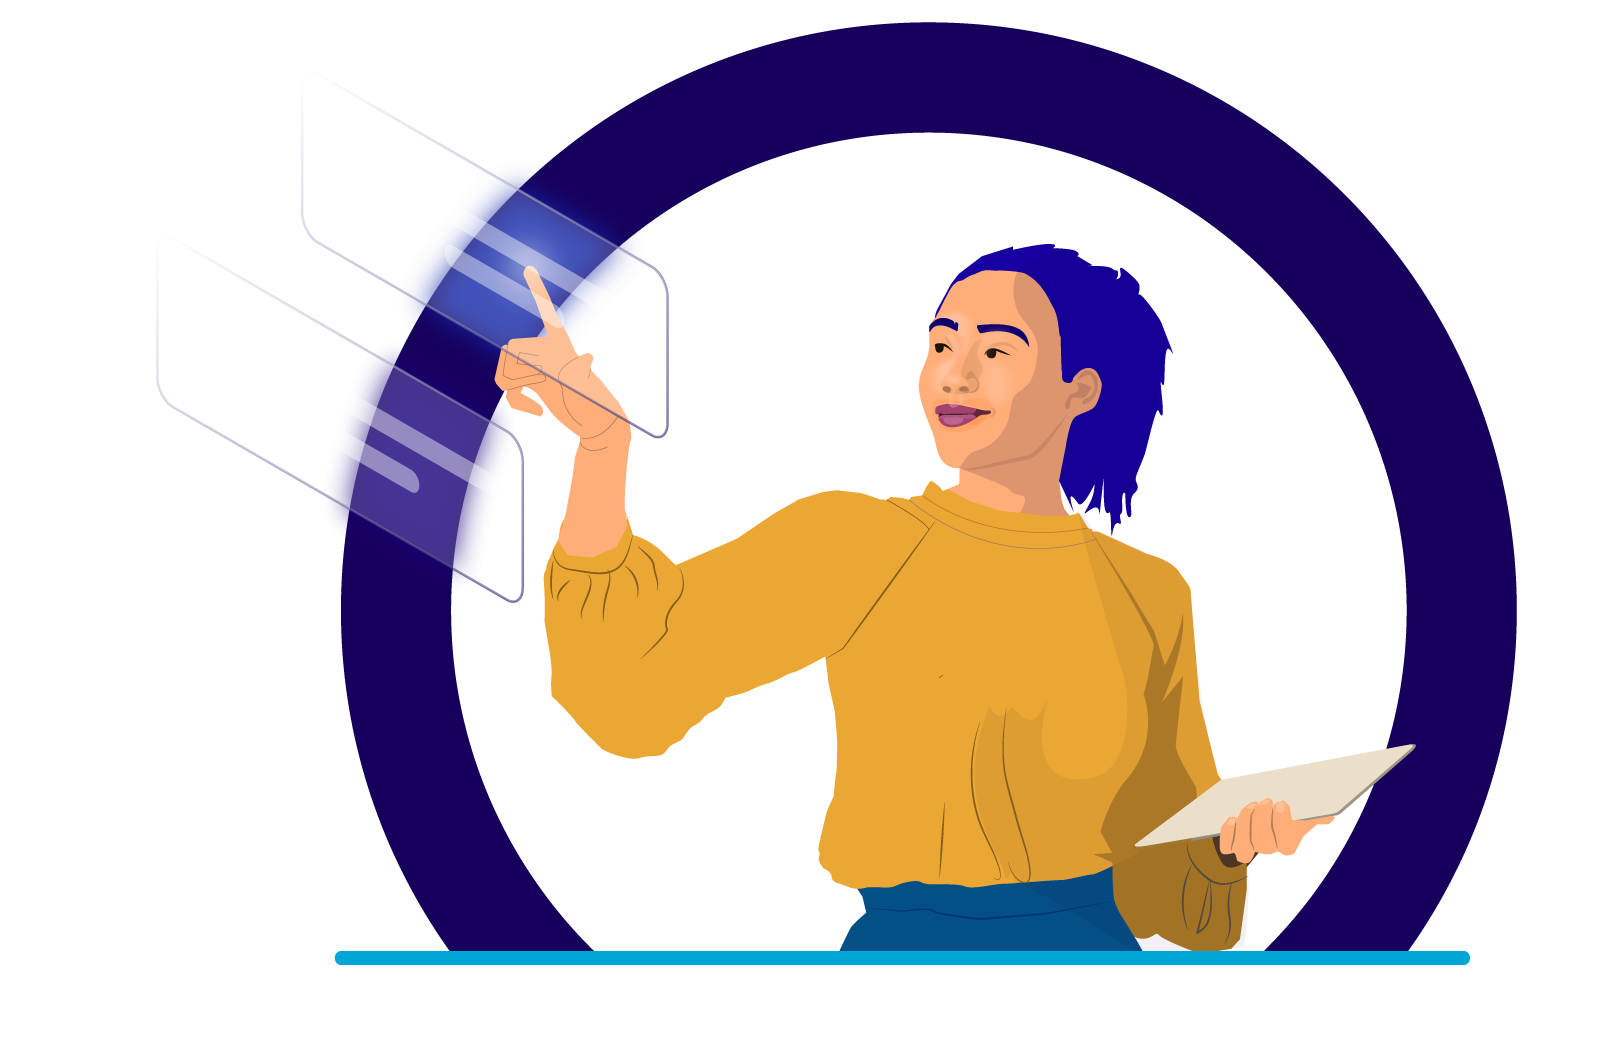 Illustration of woman touching the screen